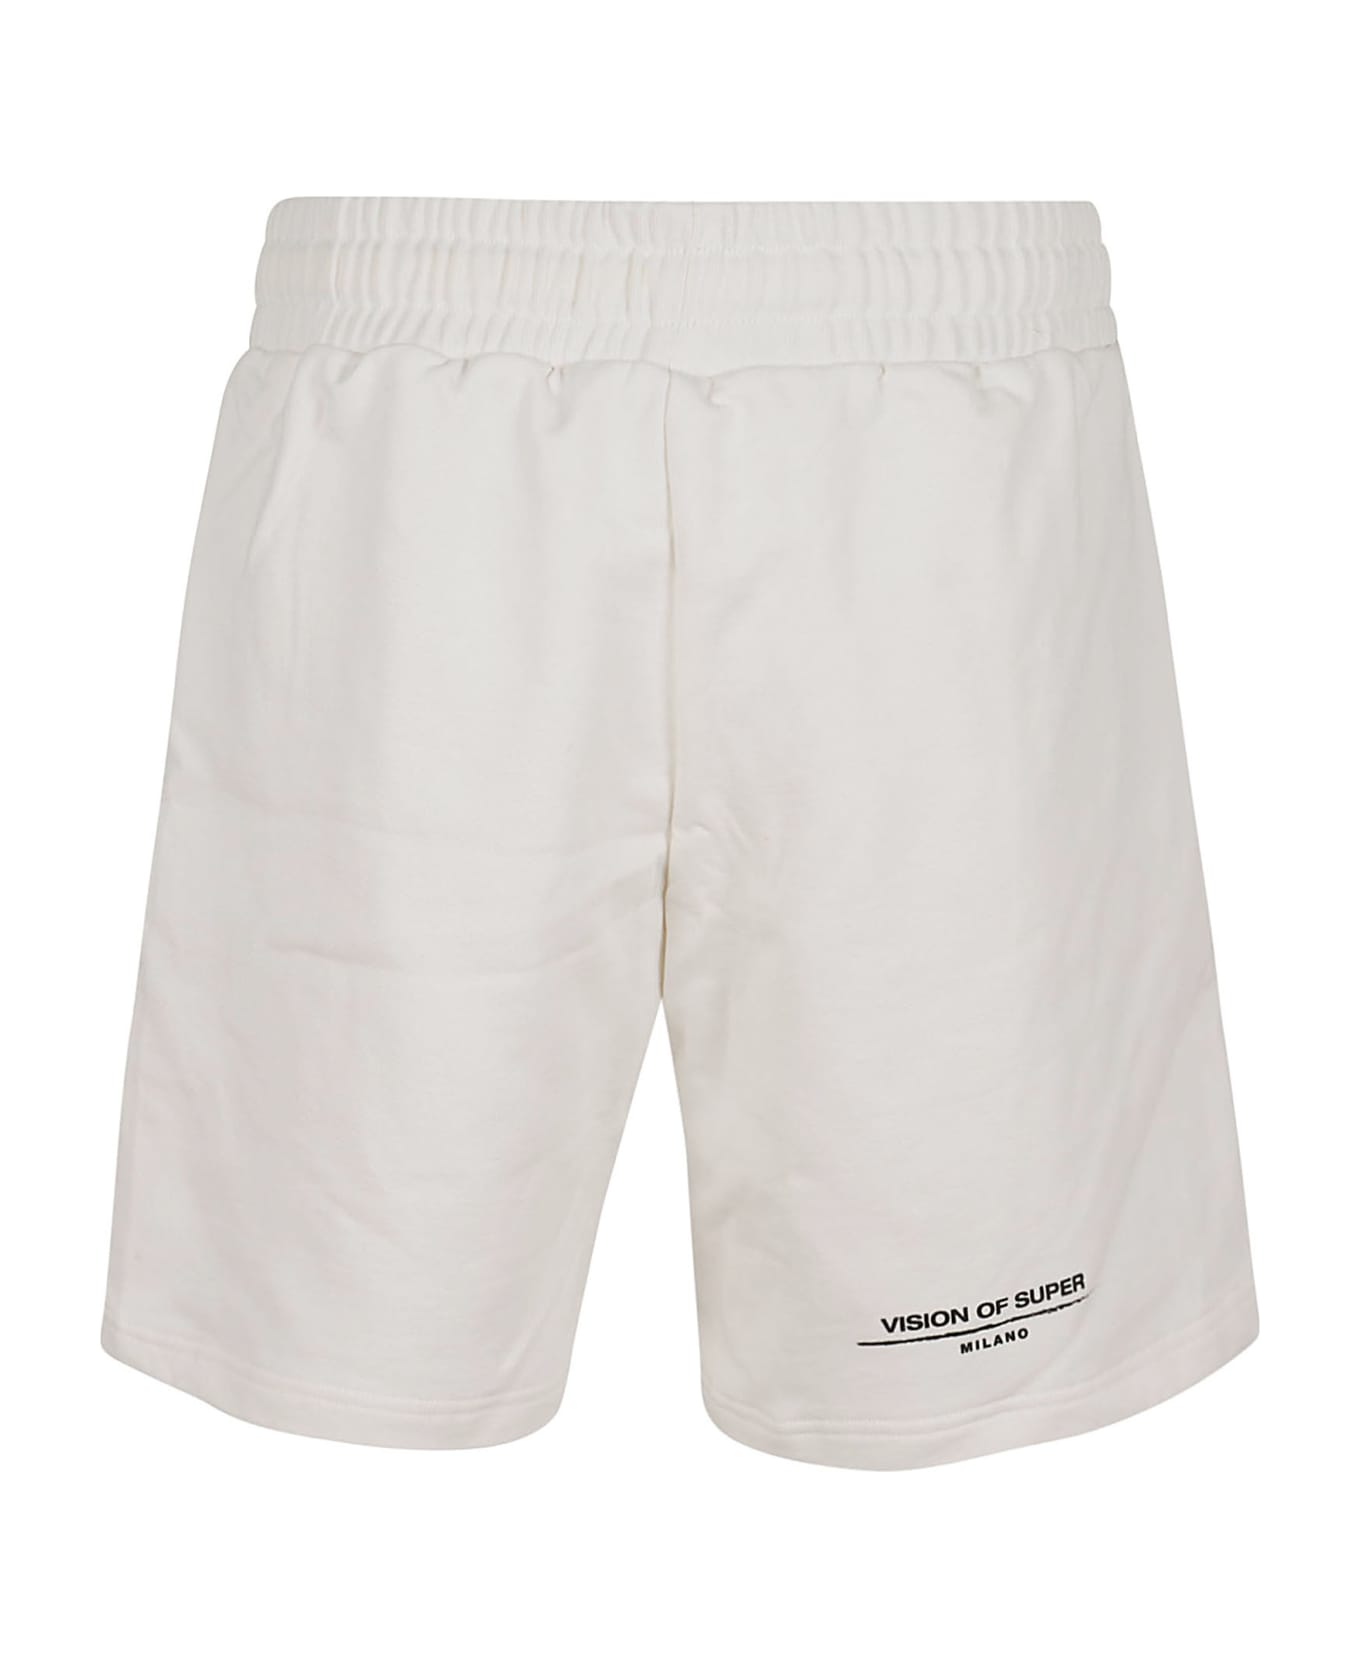 Vision of Super White Shorts With Flames Logo And Metal Label - White ショートパンツ